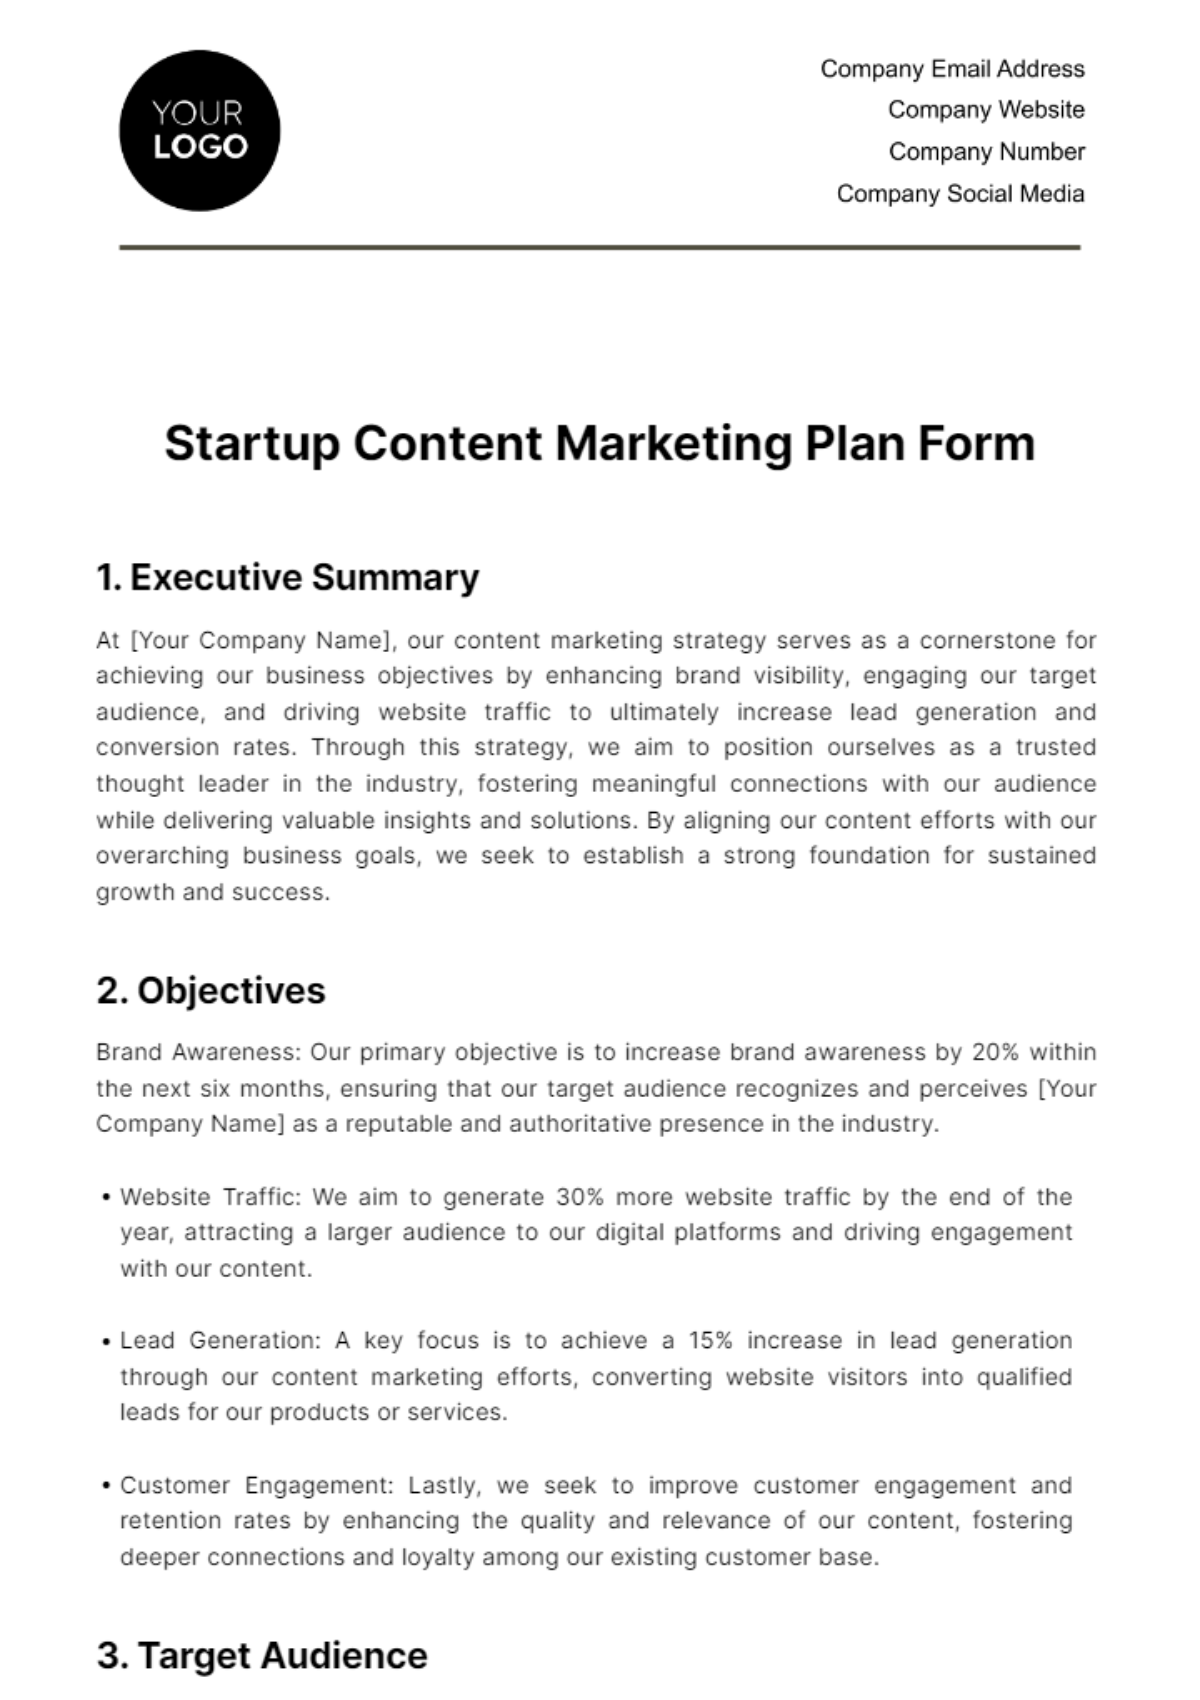 Free Startup Content Marketing Plan Form Template